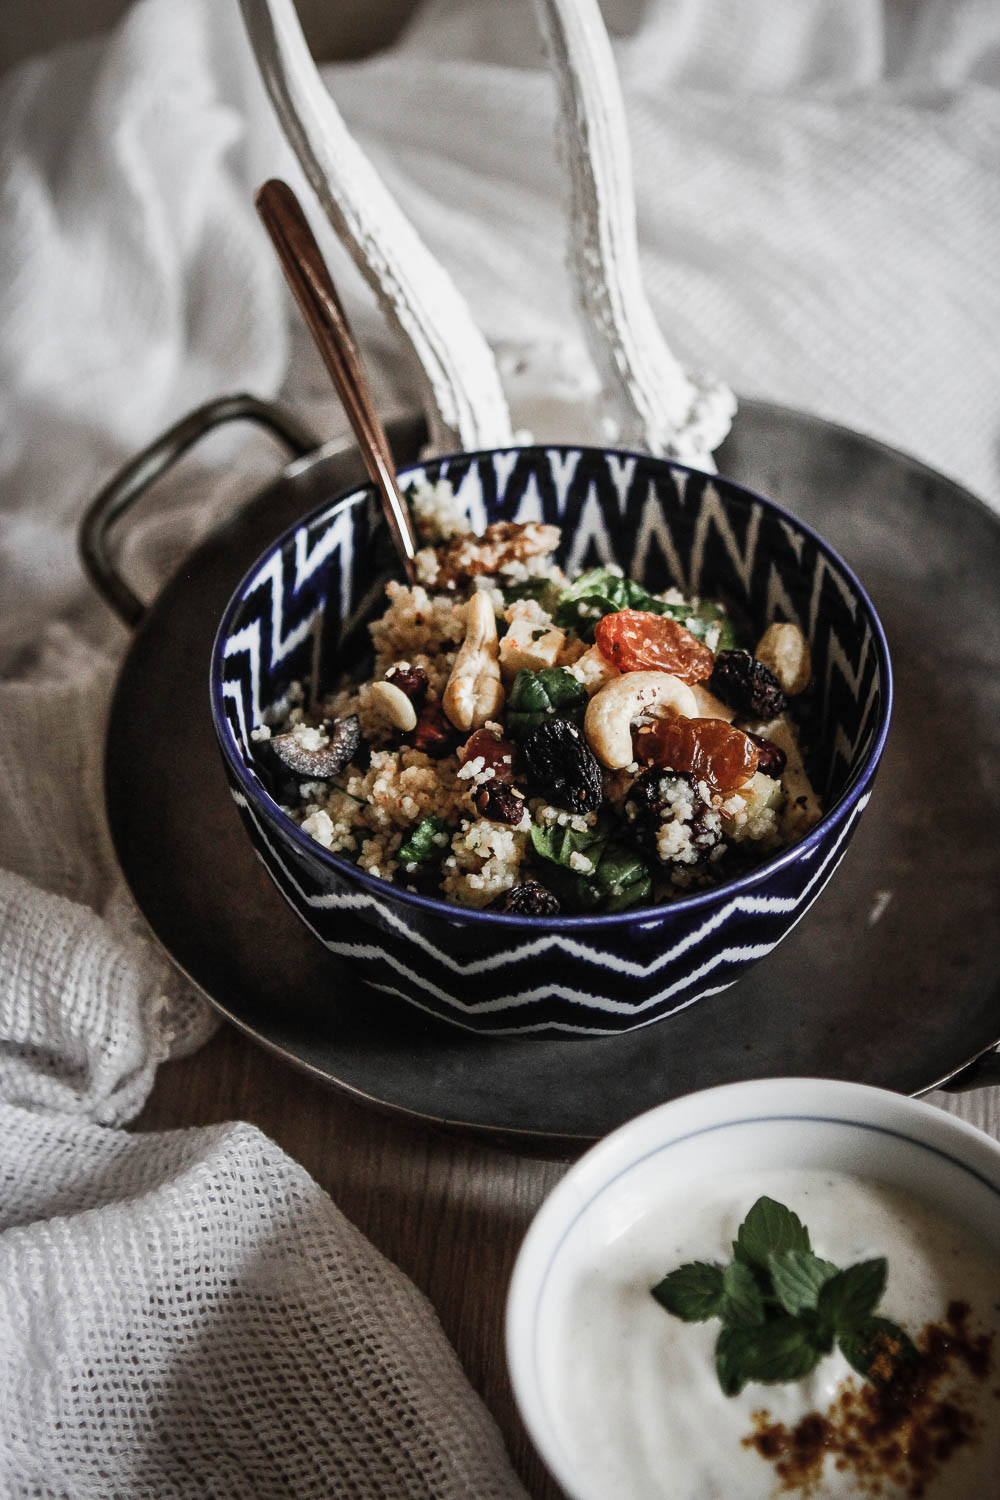 lauralamode-food-rezept-recipe-health-fitfood-fitness-oriental-orientalfood-couscous-couscous salad-fitnessfood-berlin-blogger-foodblogger-fitnessblogger